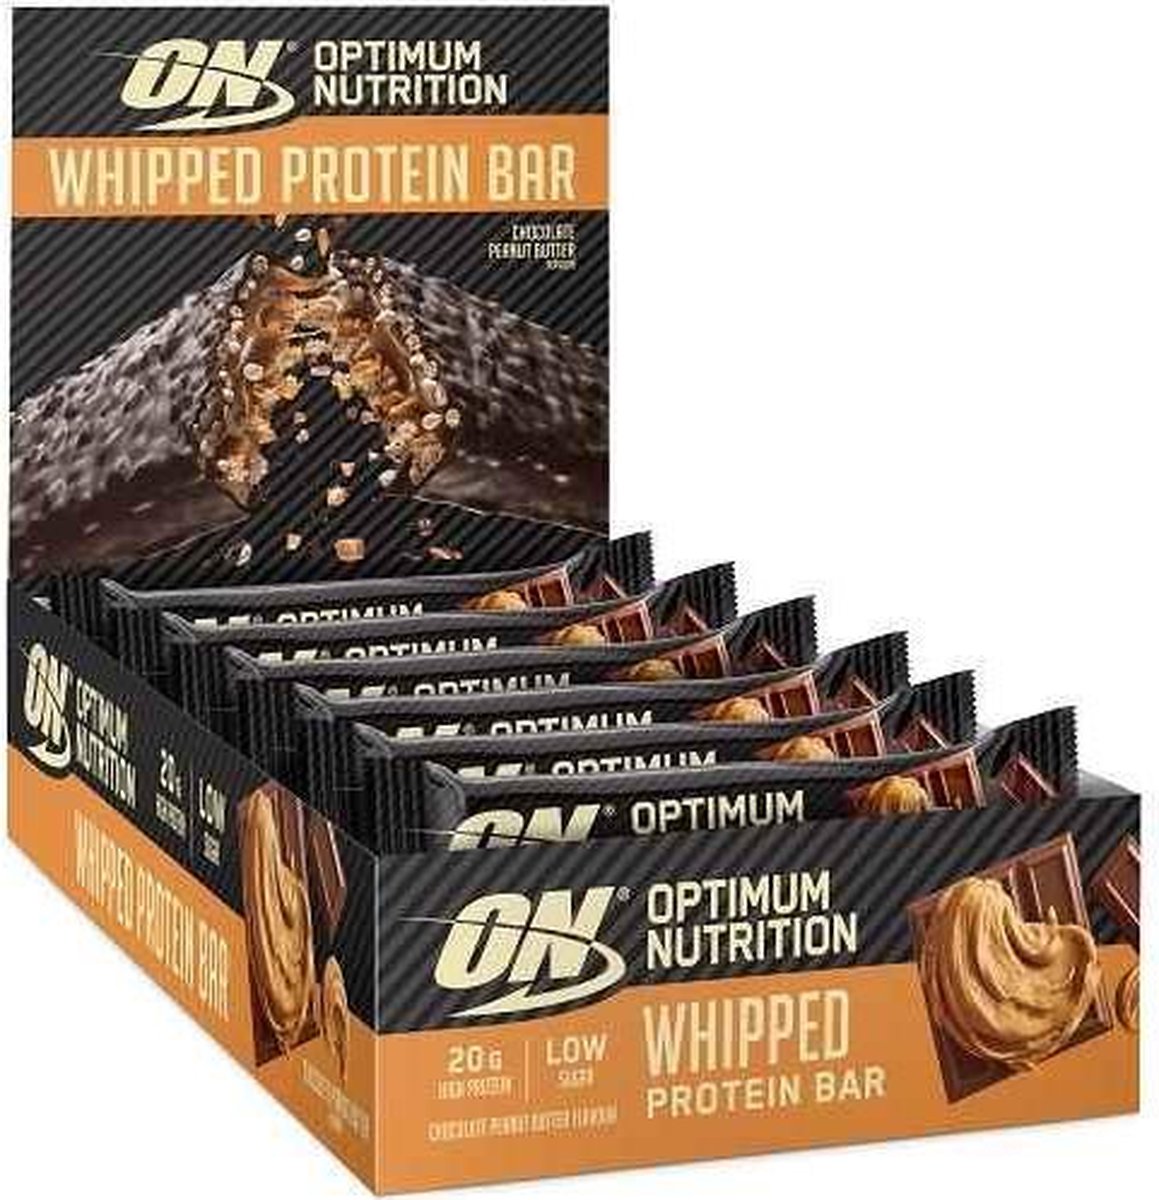 Whipped Protein Bar (10x60g) Chocolate Peanut Butter